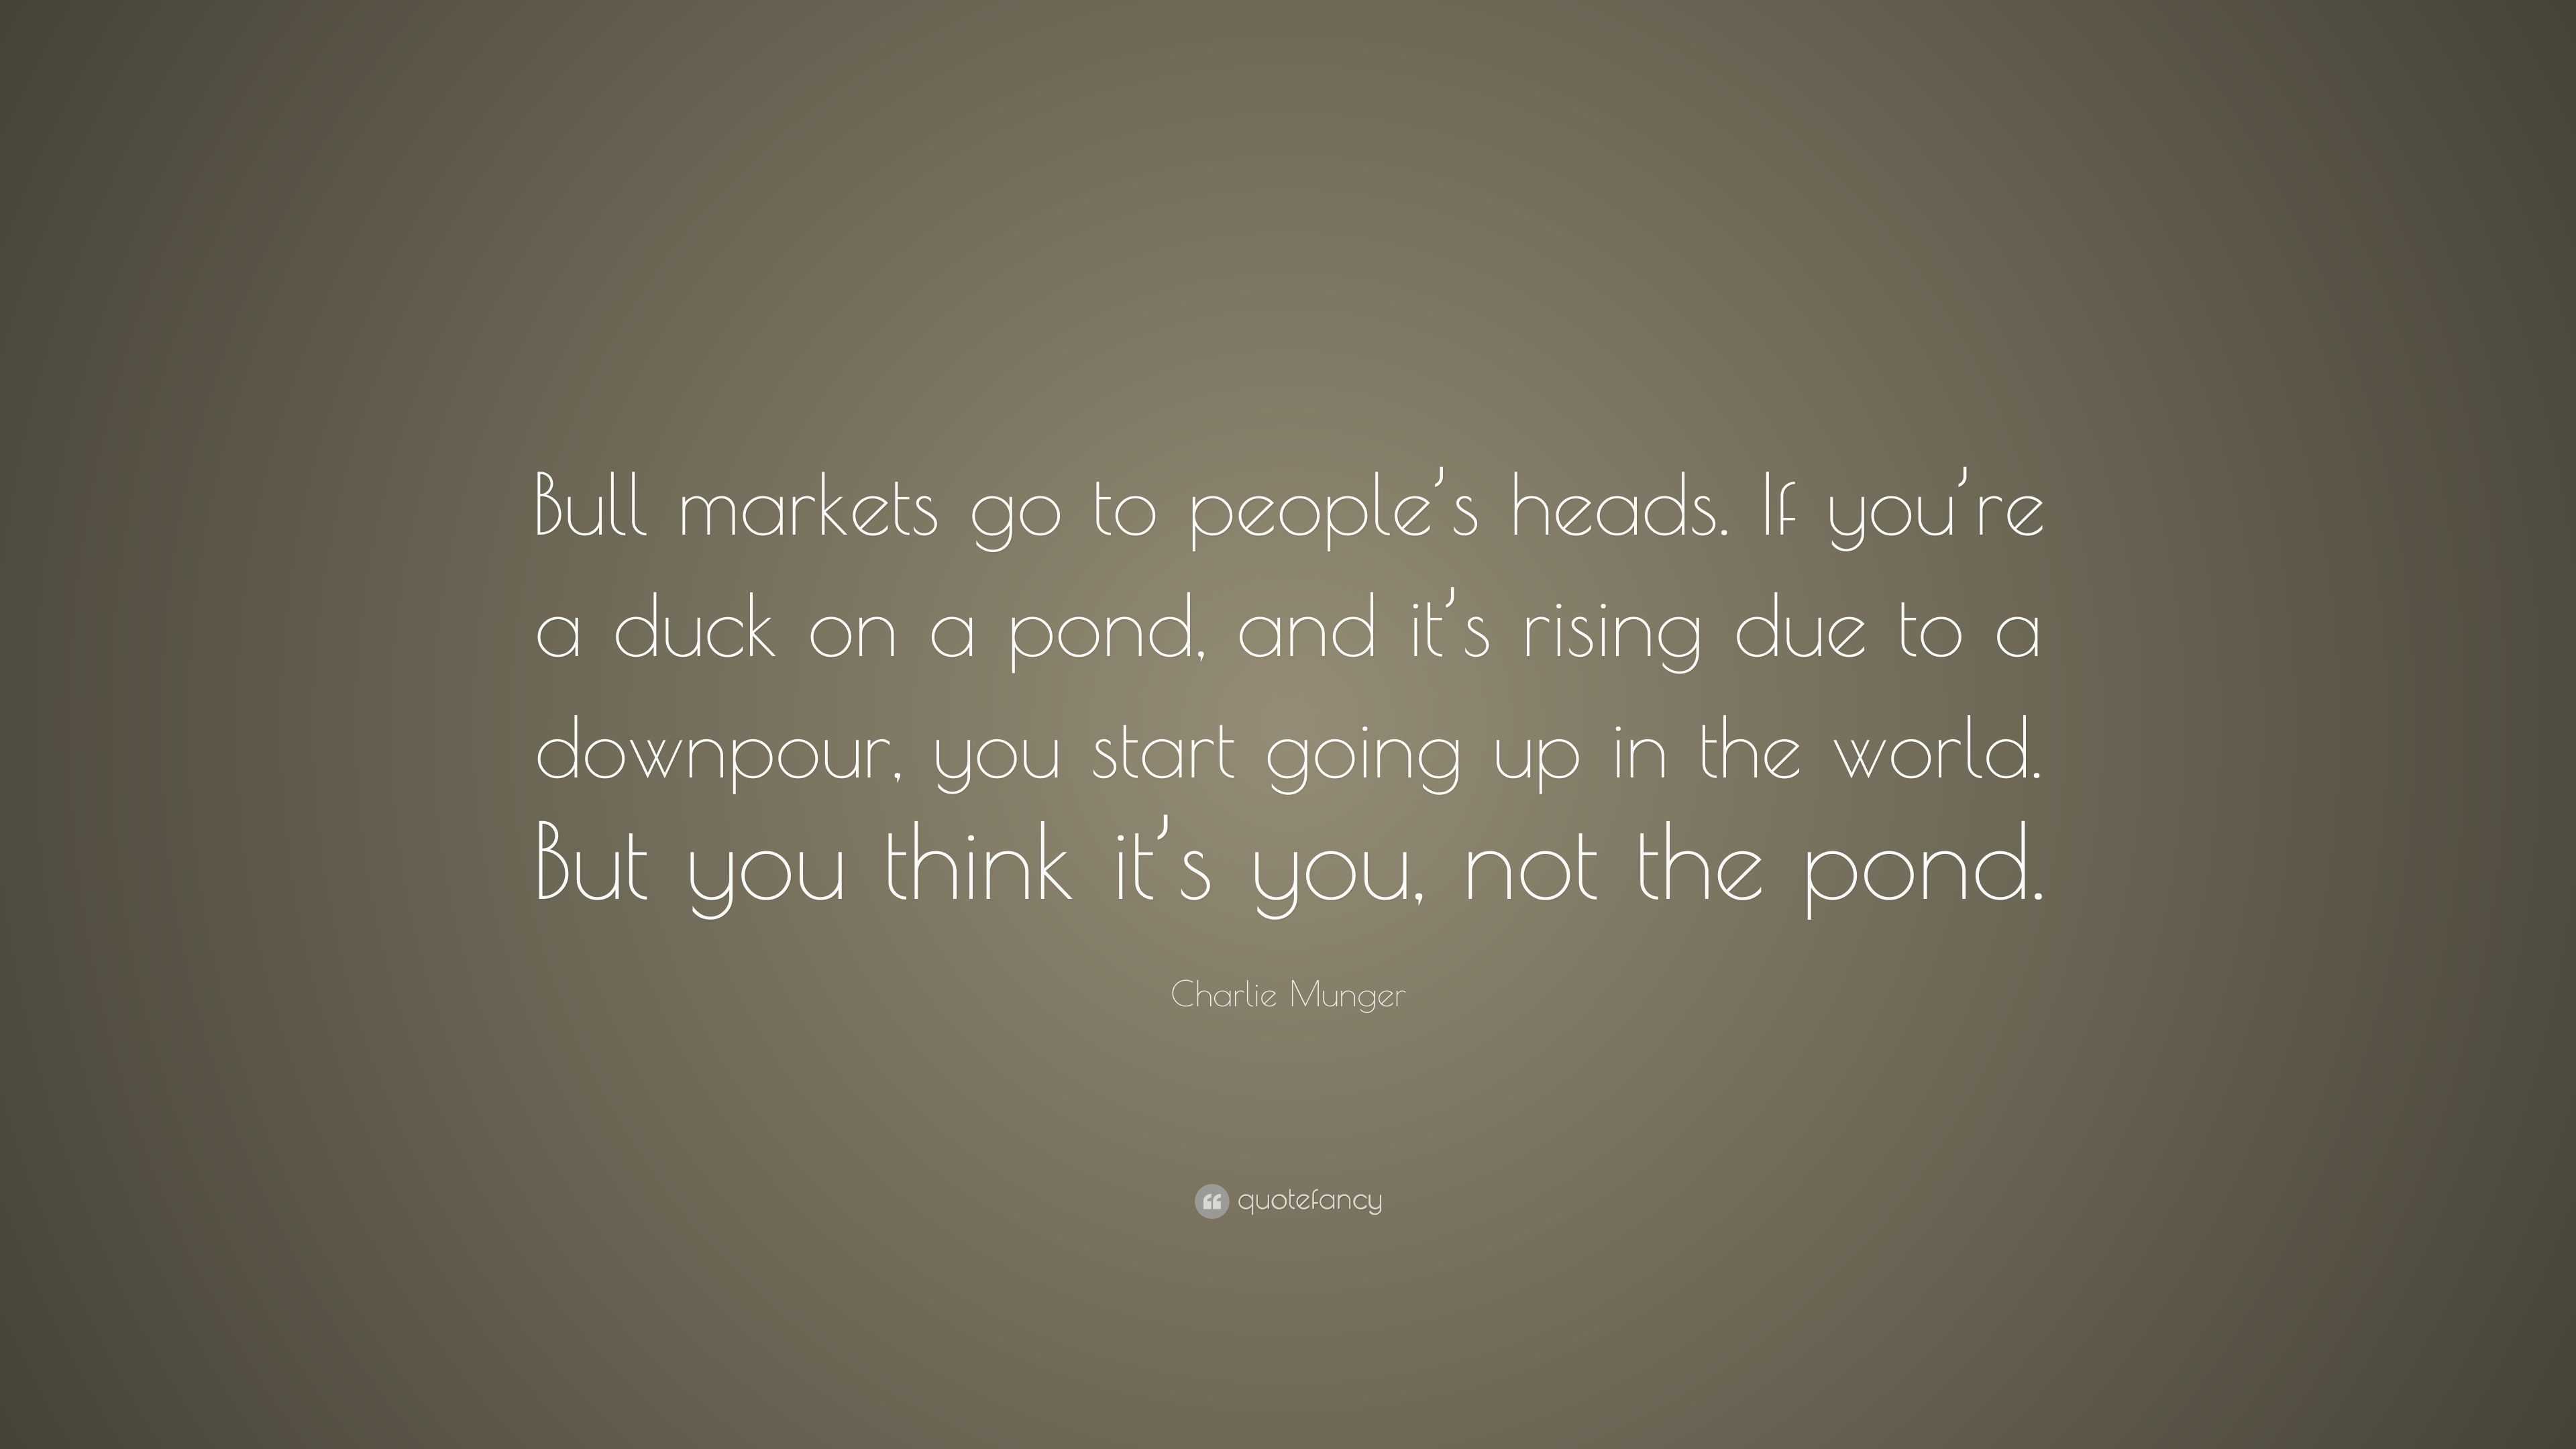 Charlie Munger Quote: “Bull markets go to people’s heads. If you’re a ...